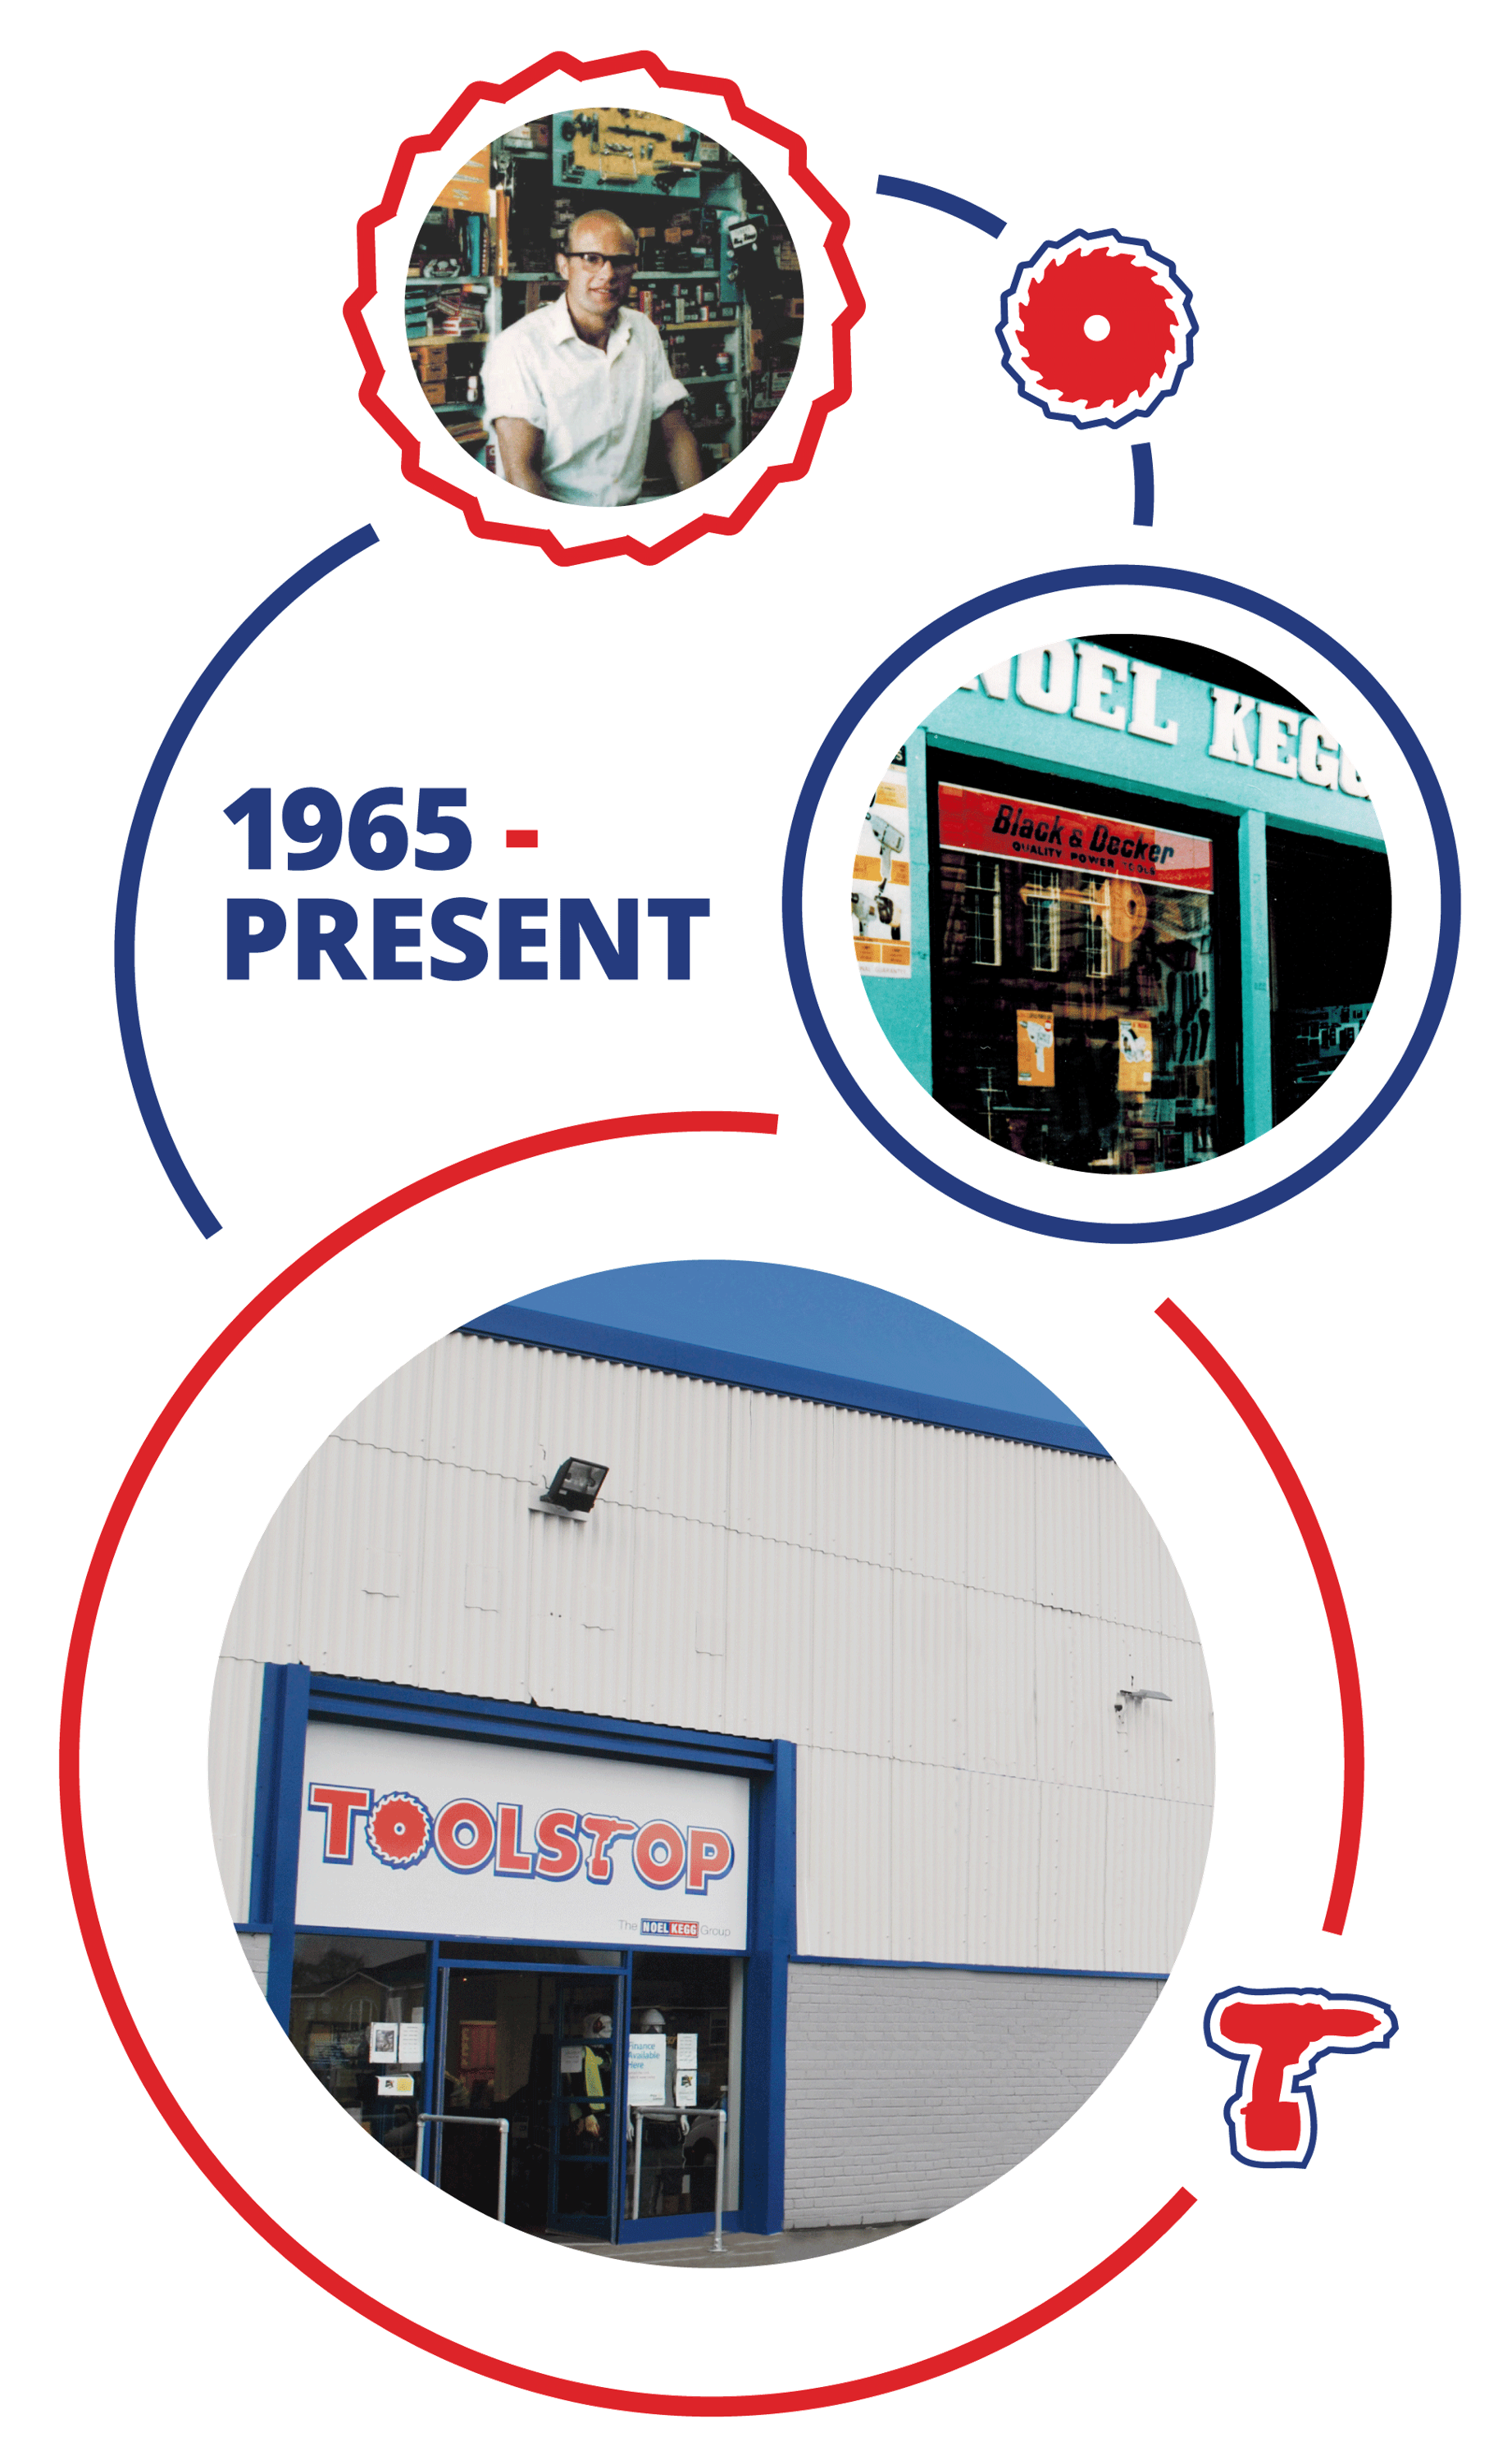 Toolstop's Trading History